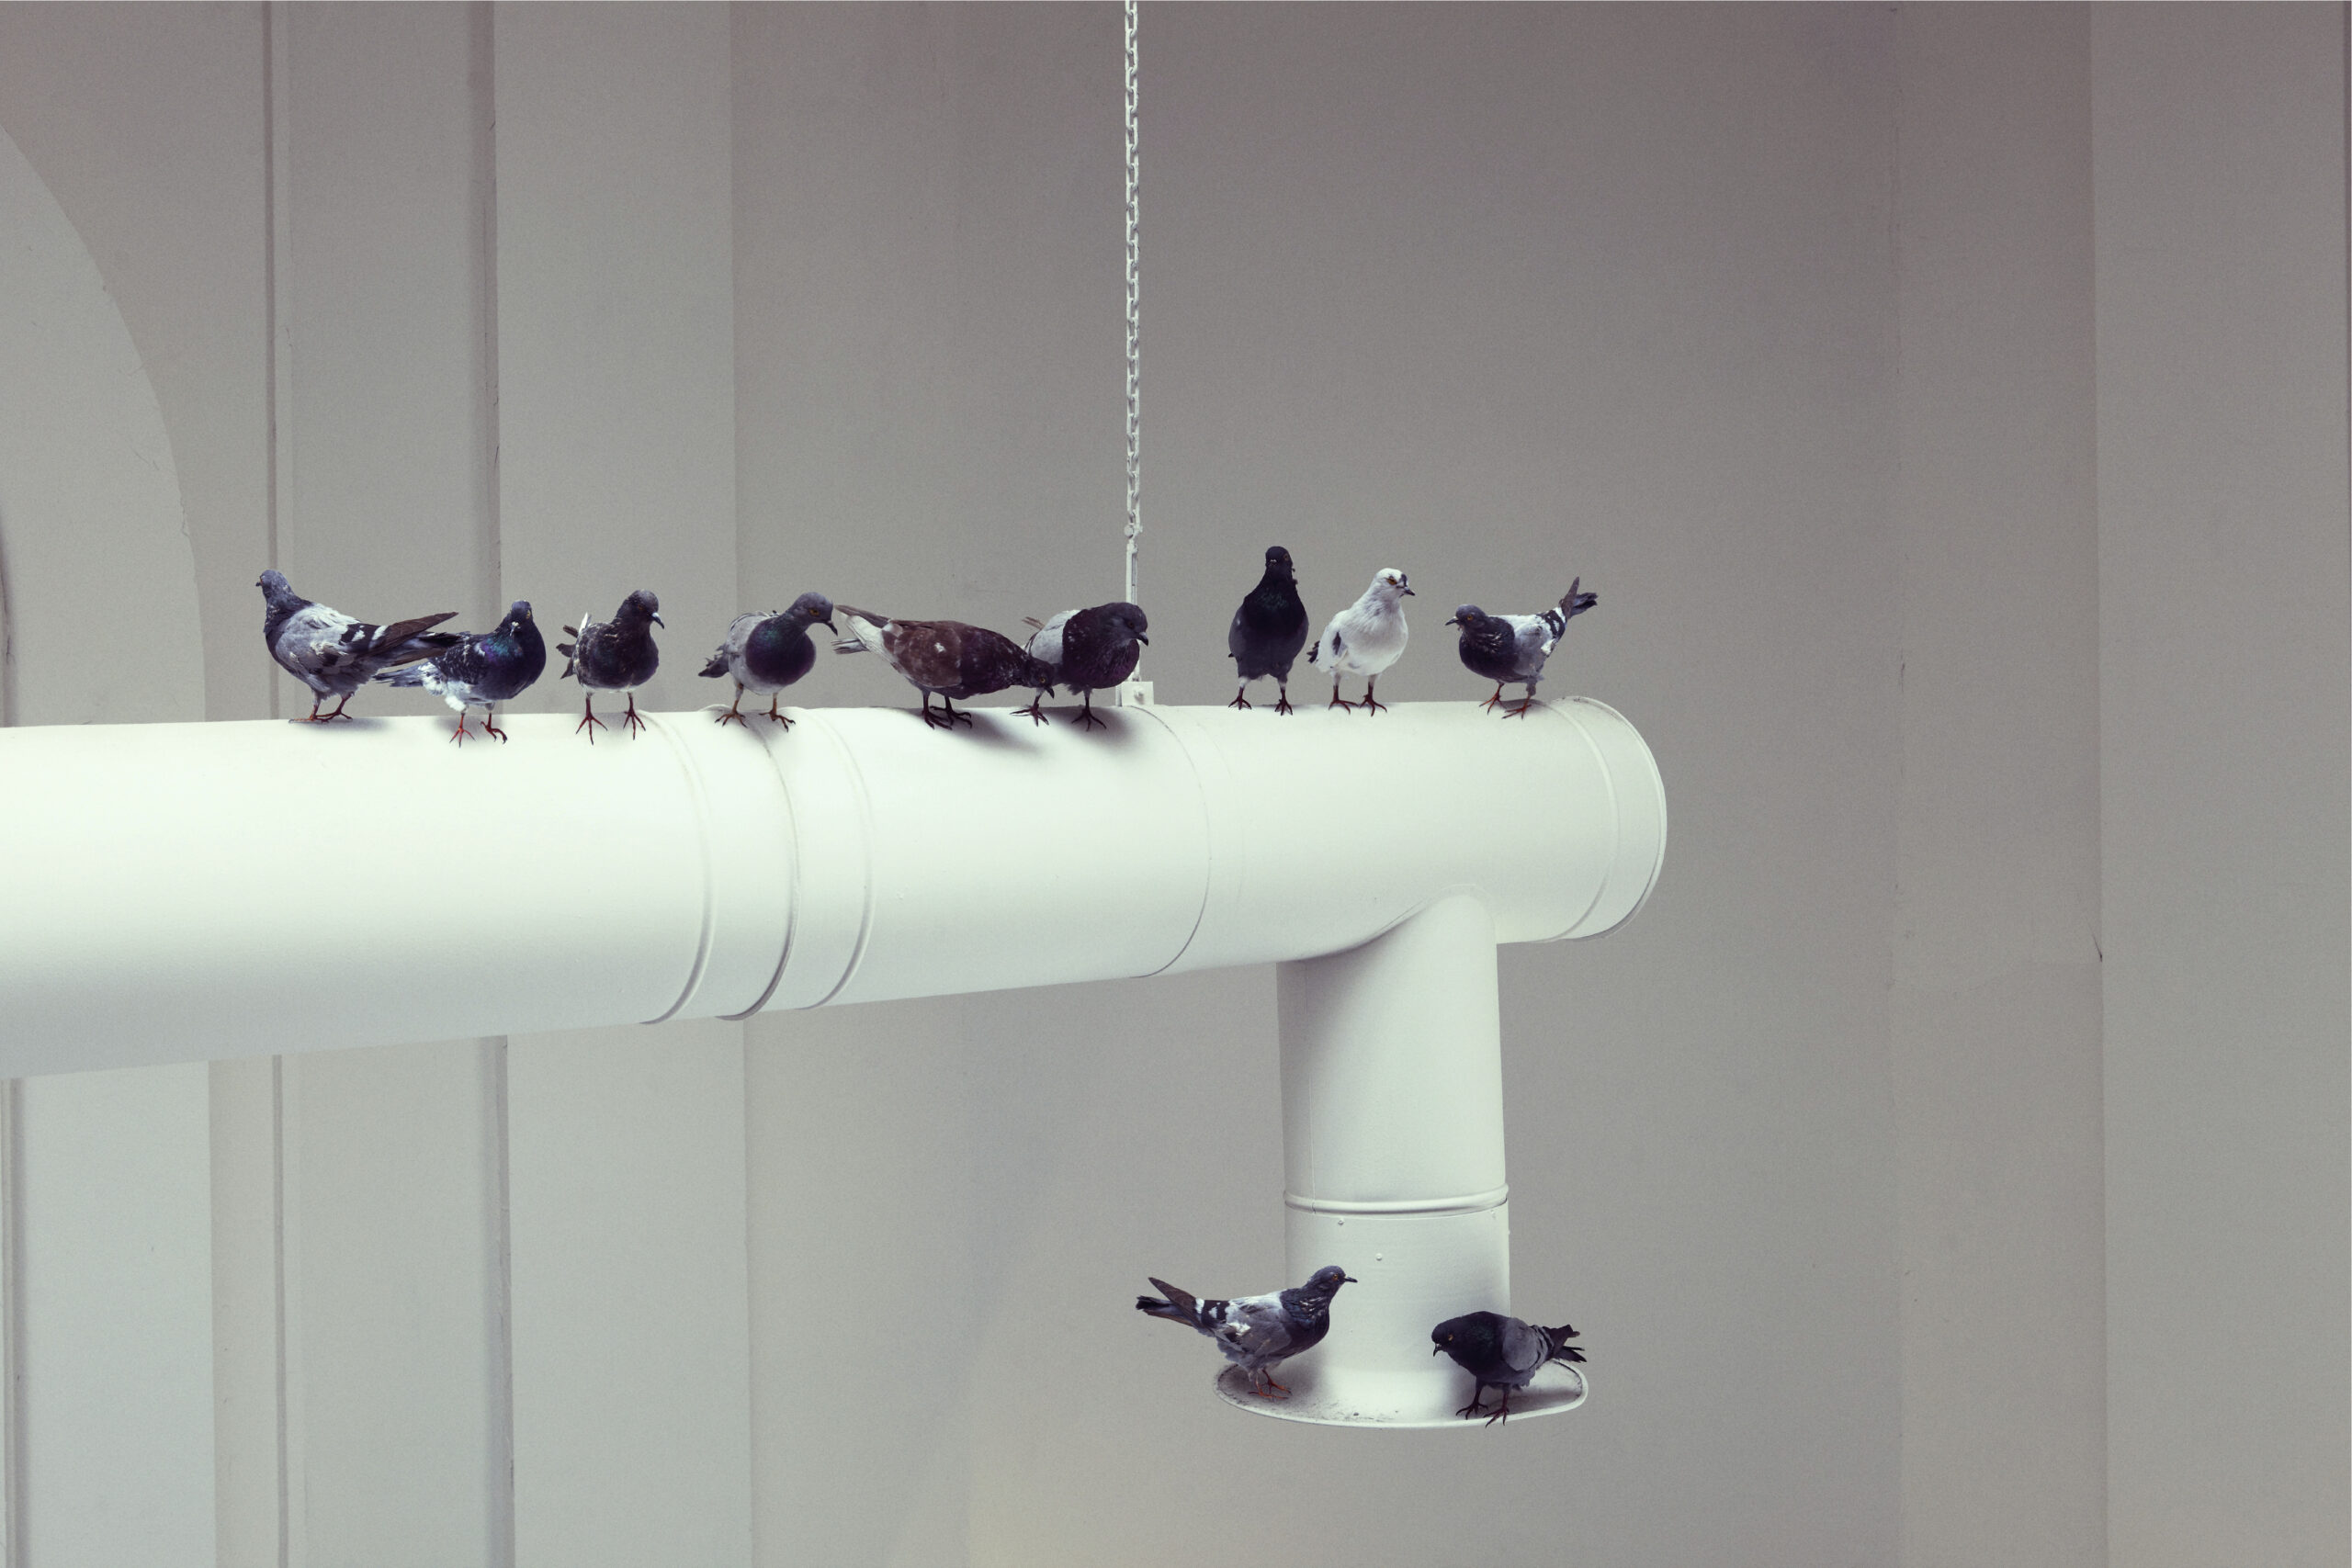 Maurizio Cattelan, Others, 2011, Taxidermied pigeons, Environmental dimensions, Installation view, 54th Venice Biennale, 2011